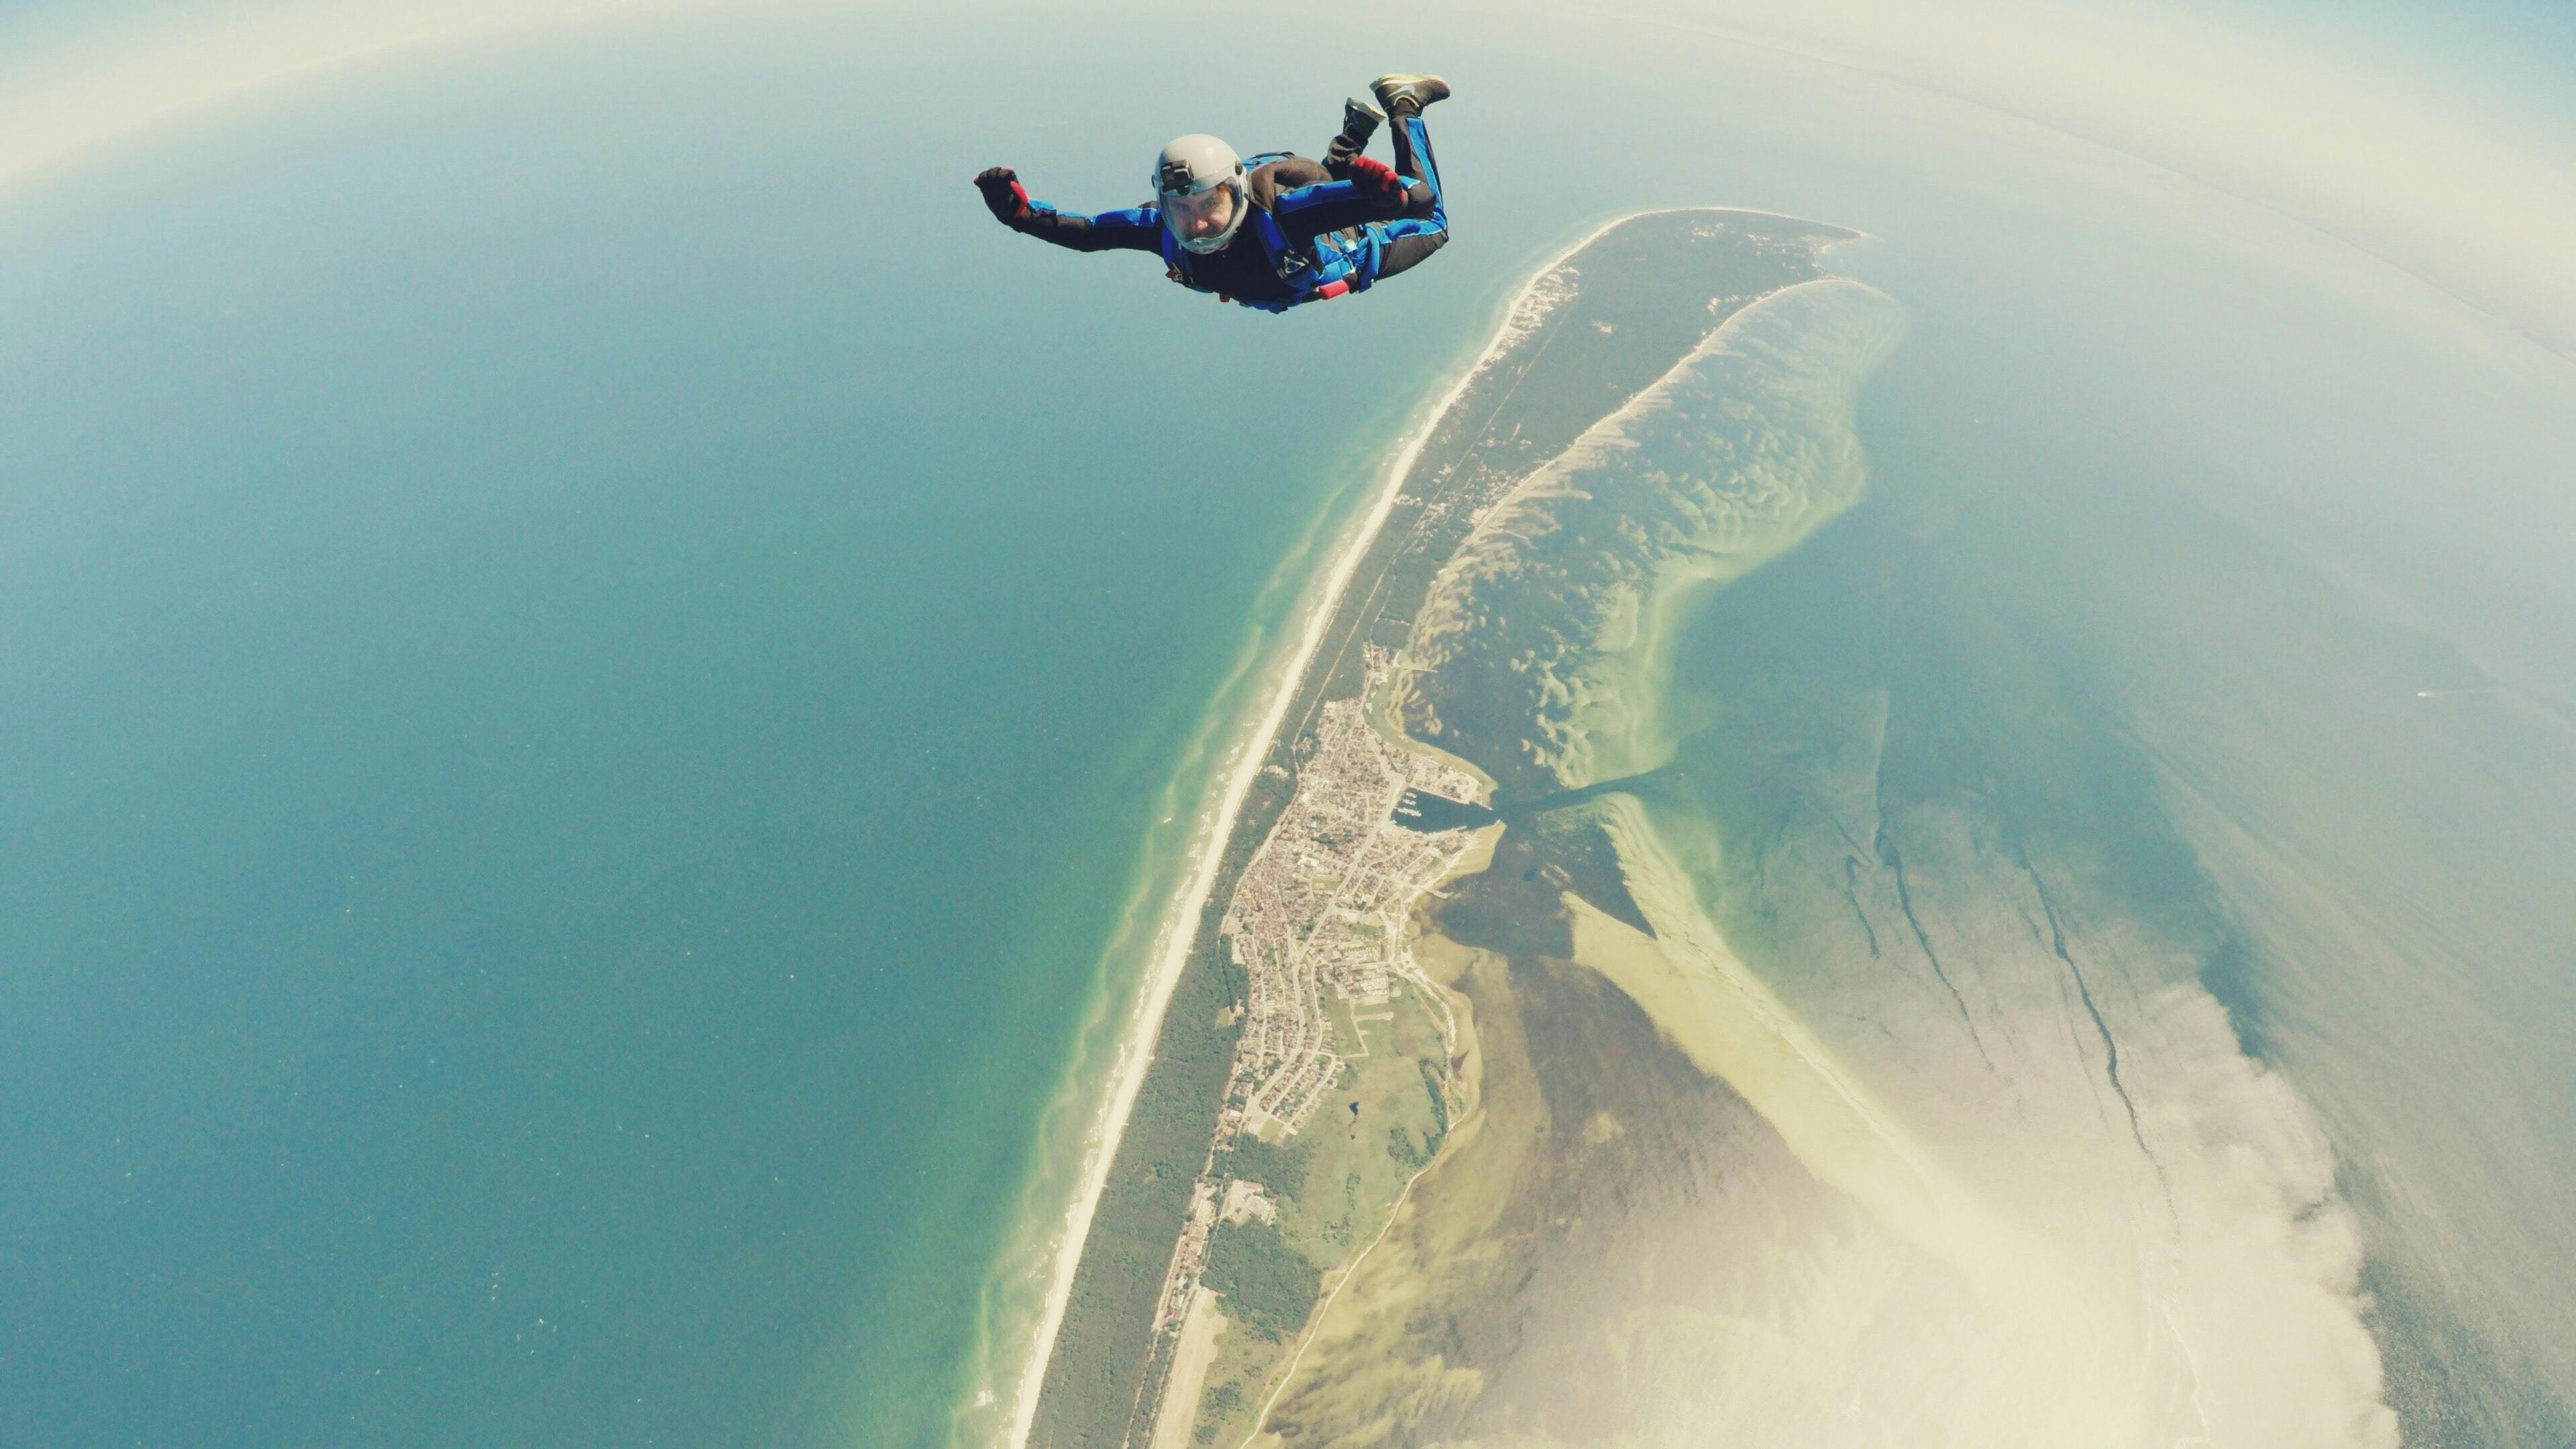 Go Skydiving: Best places to skydive, tandem skydiving, FAQ and more